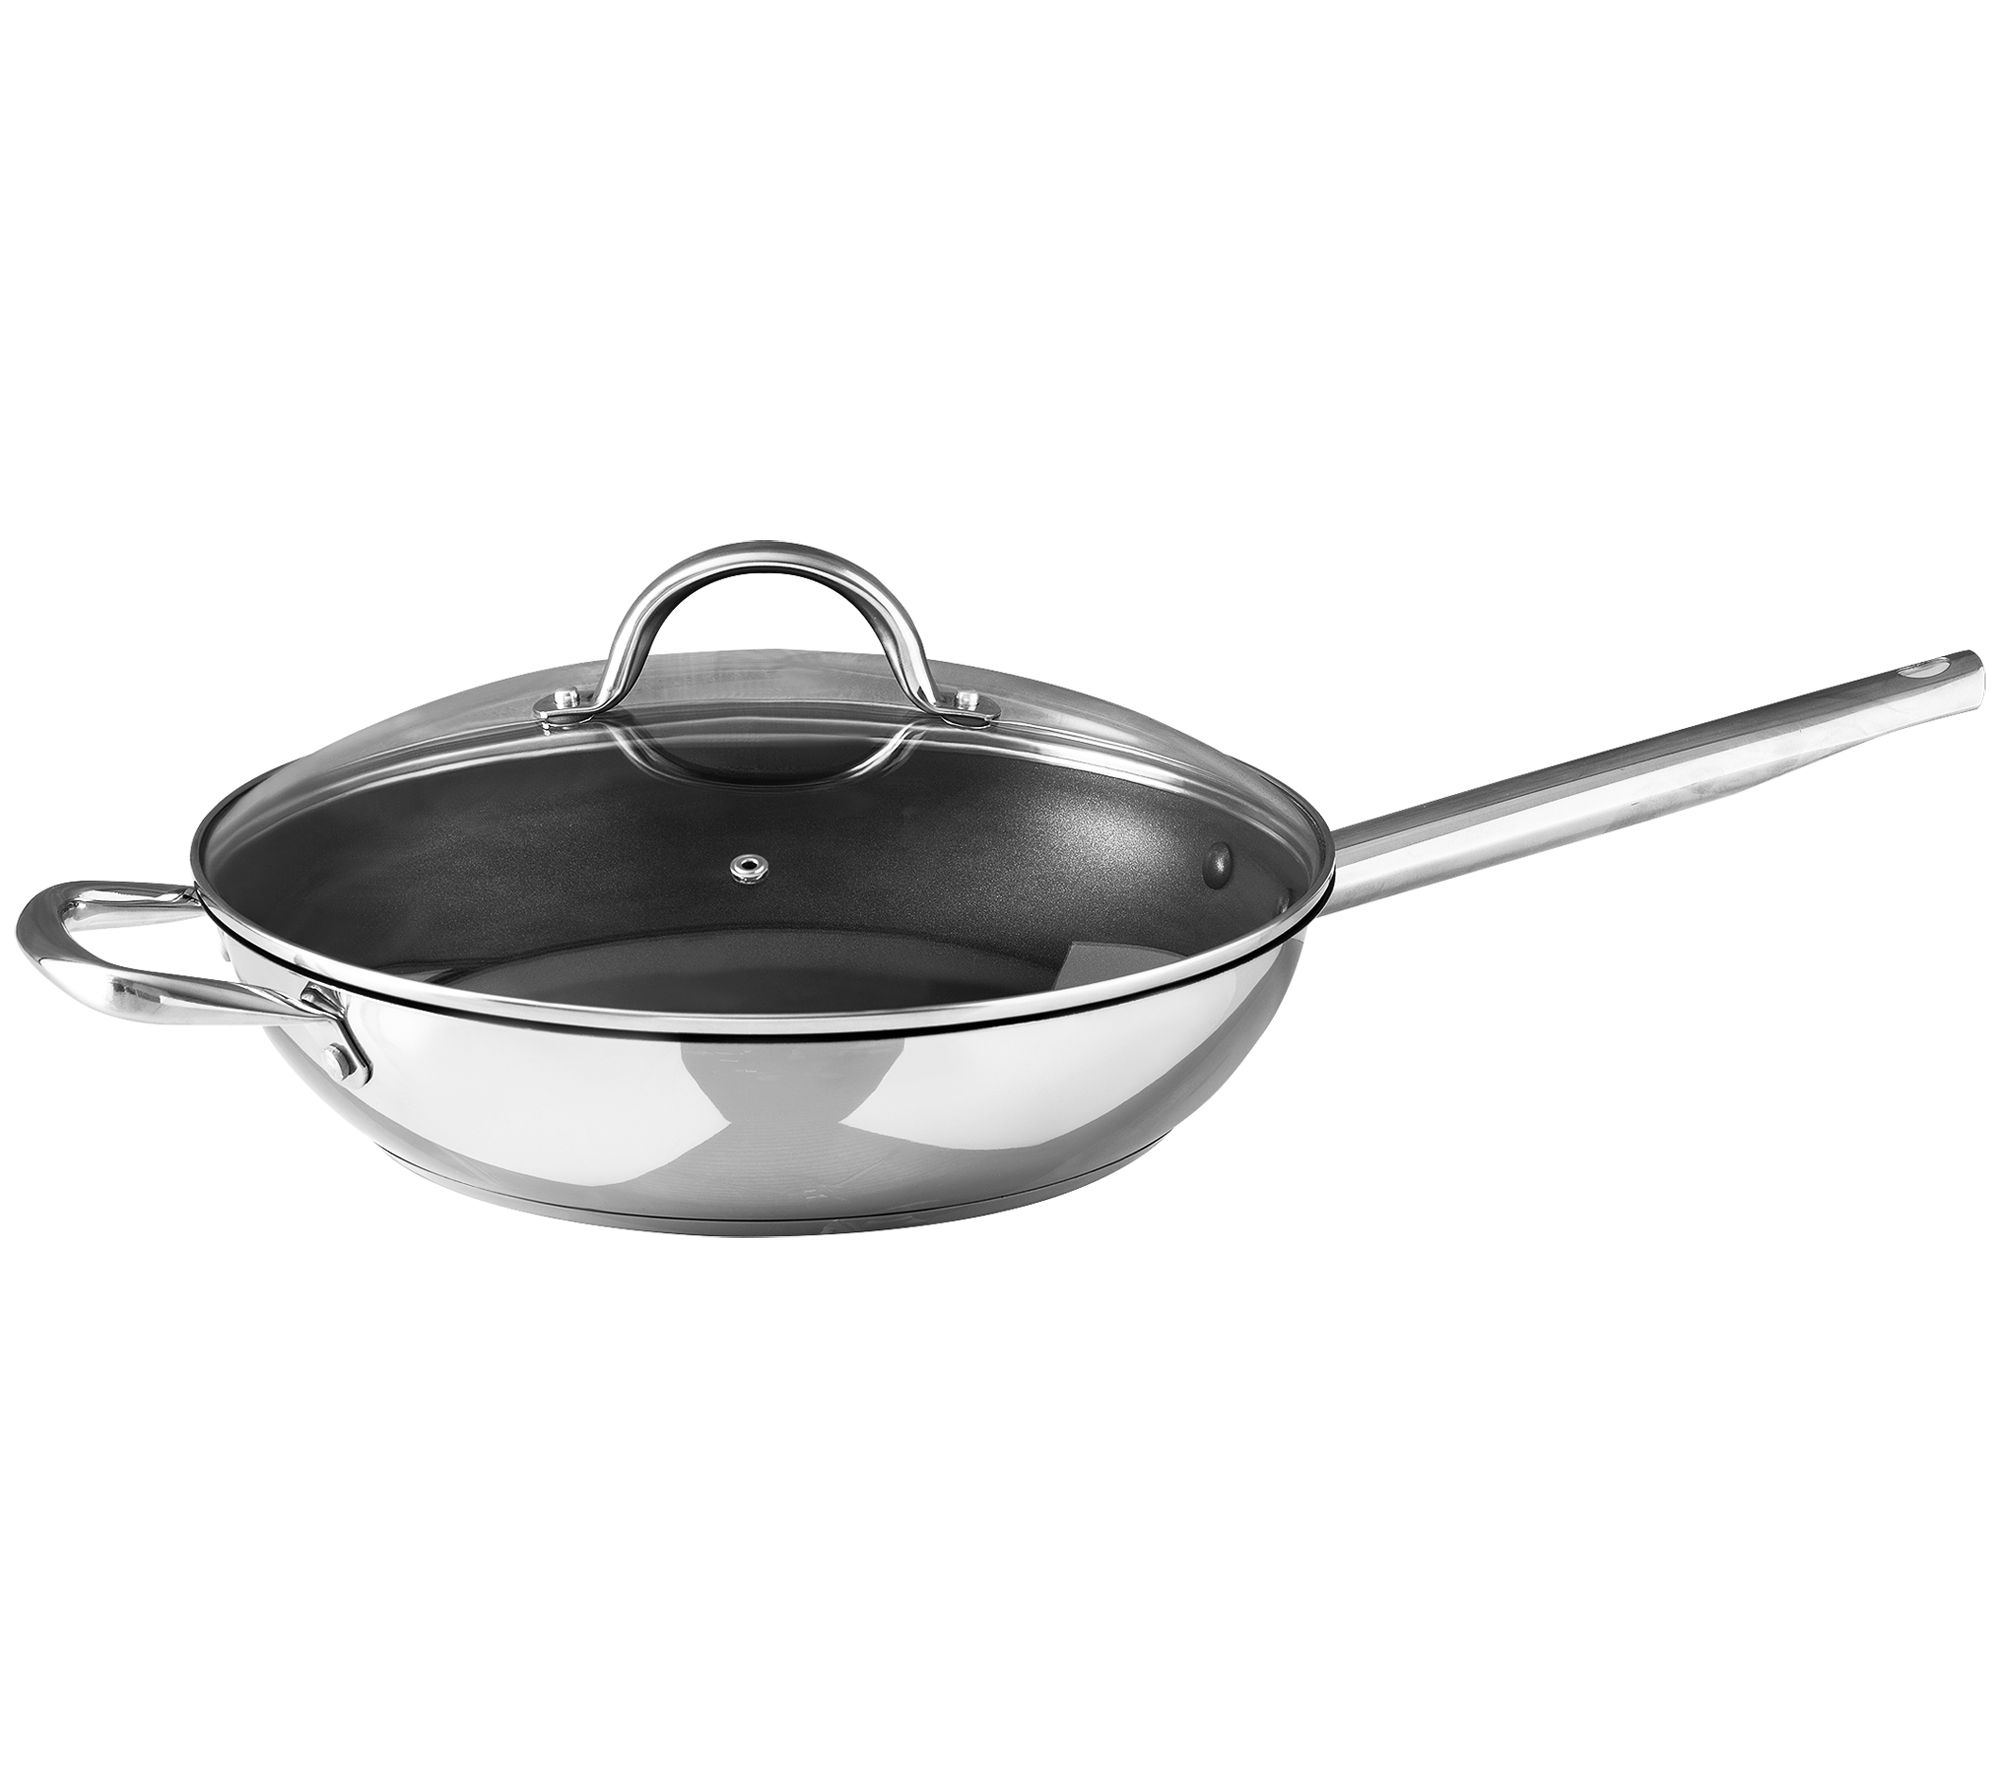  THE ROCK by Starfrit 12.5-Inch Nonstick Wok with Helping  Handle, One Size, Black: Home & Kitchen